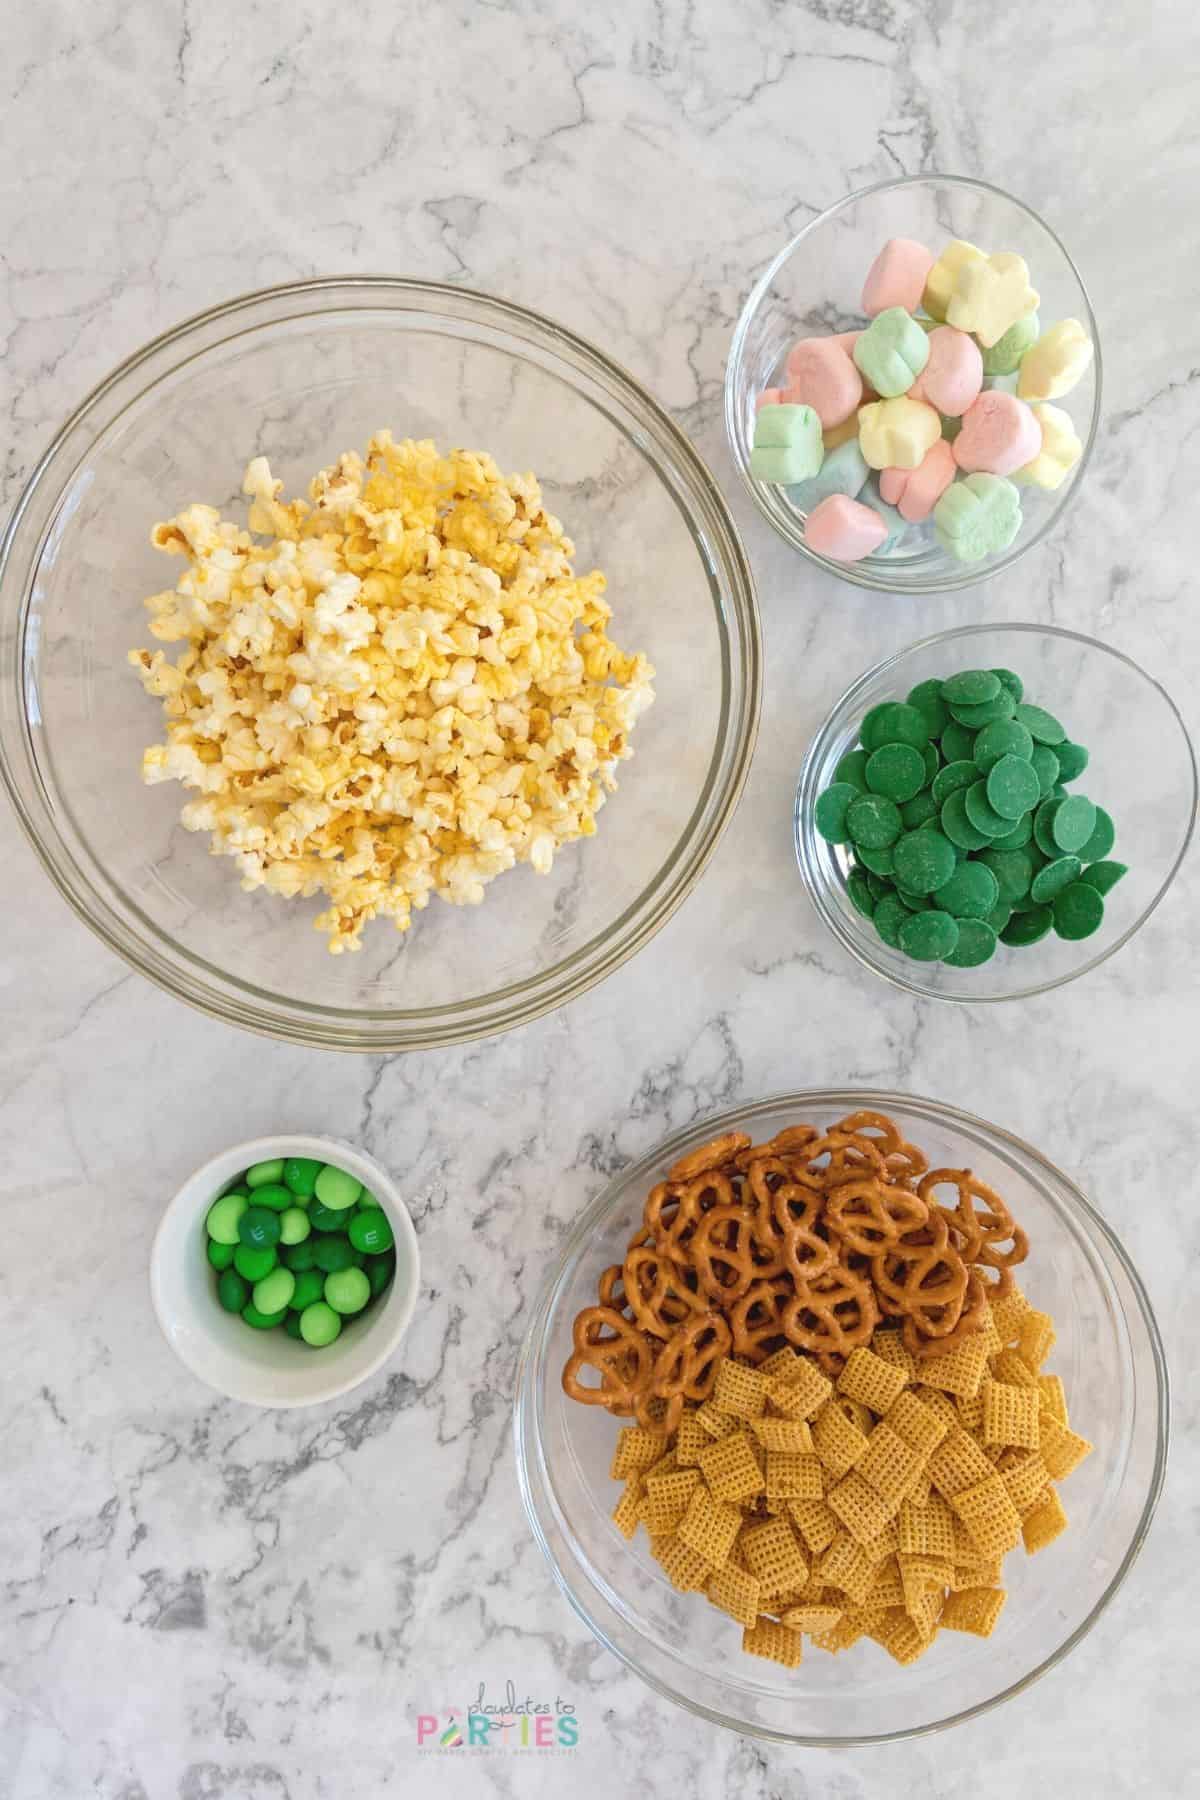 Ingredients for Leprechaun bait snack mix for St. Patrick's Day.